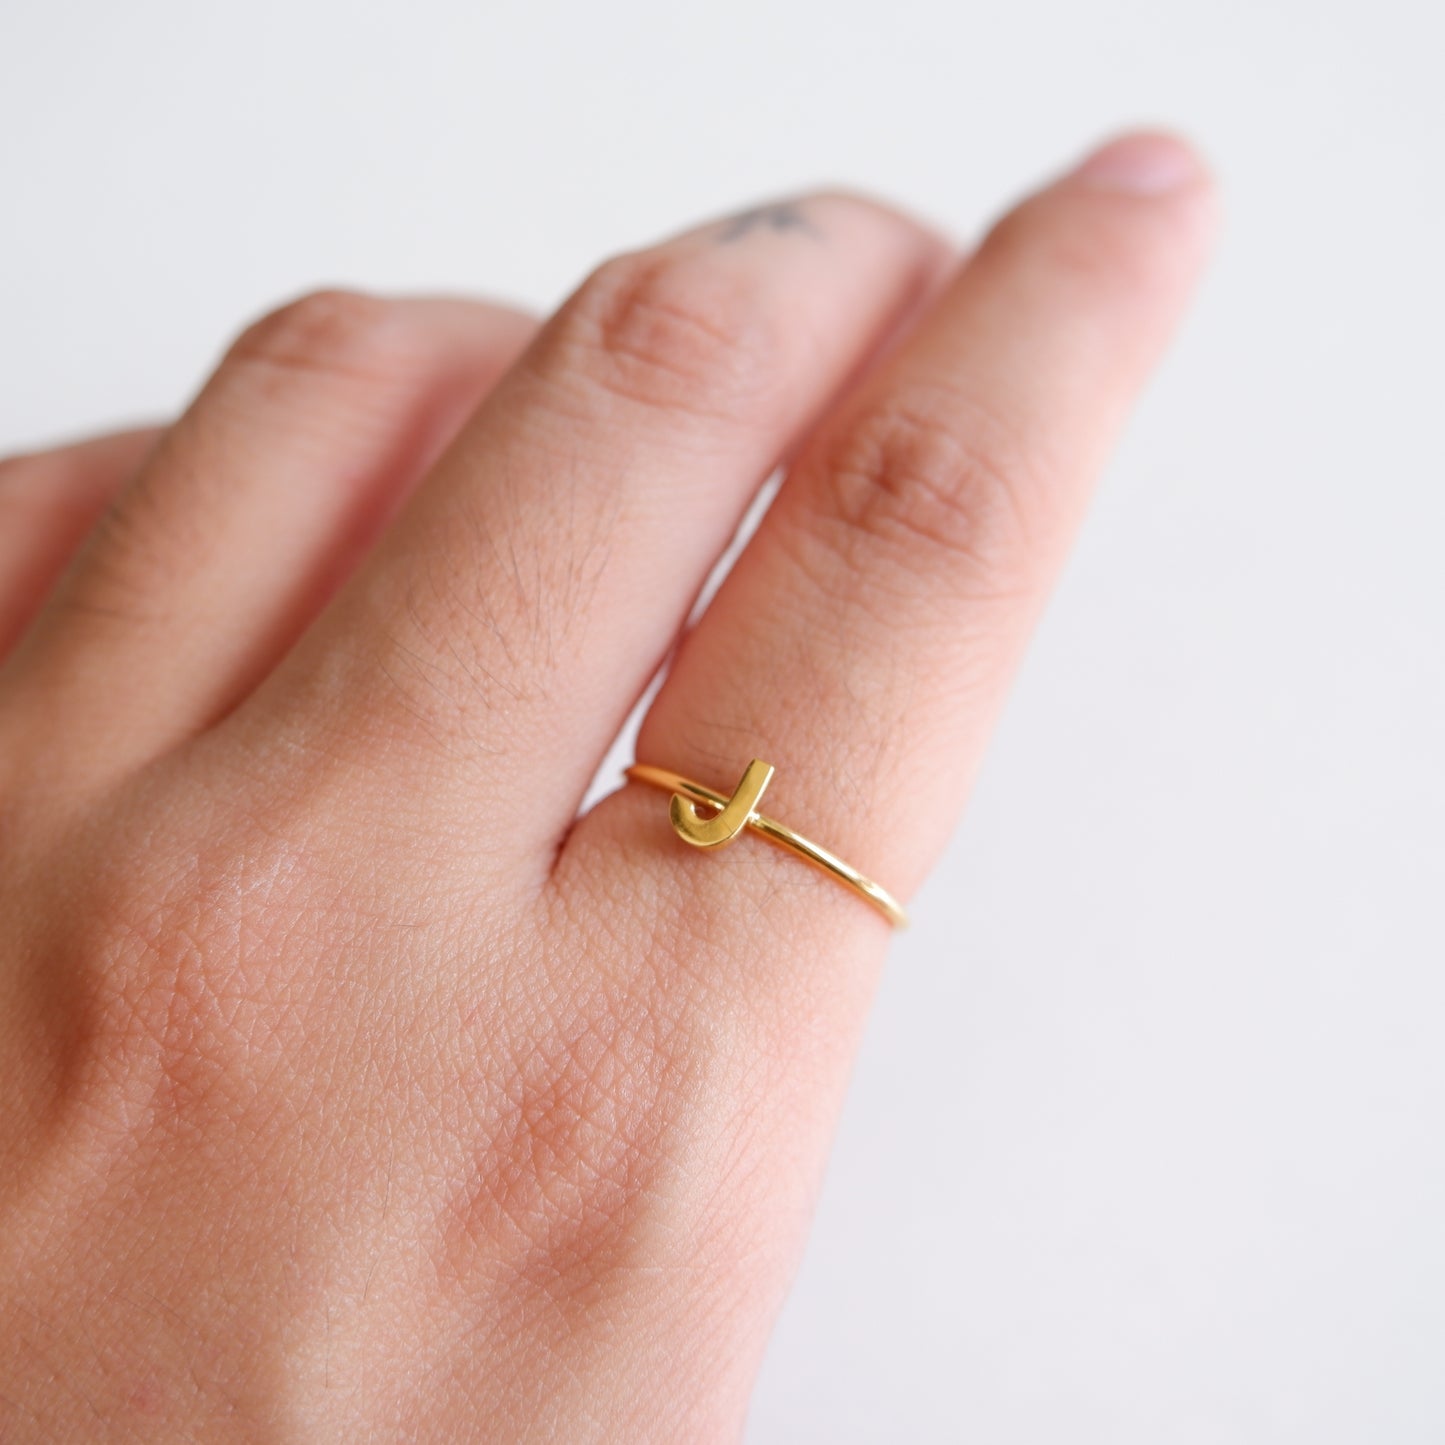 The Initial Ring in Solid Gold